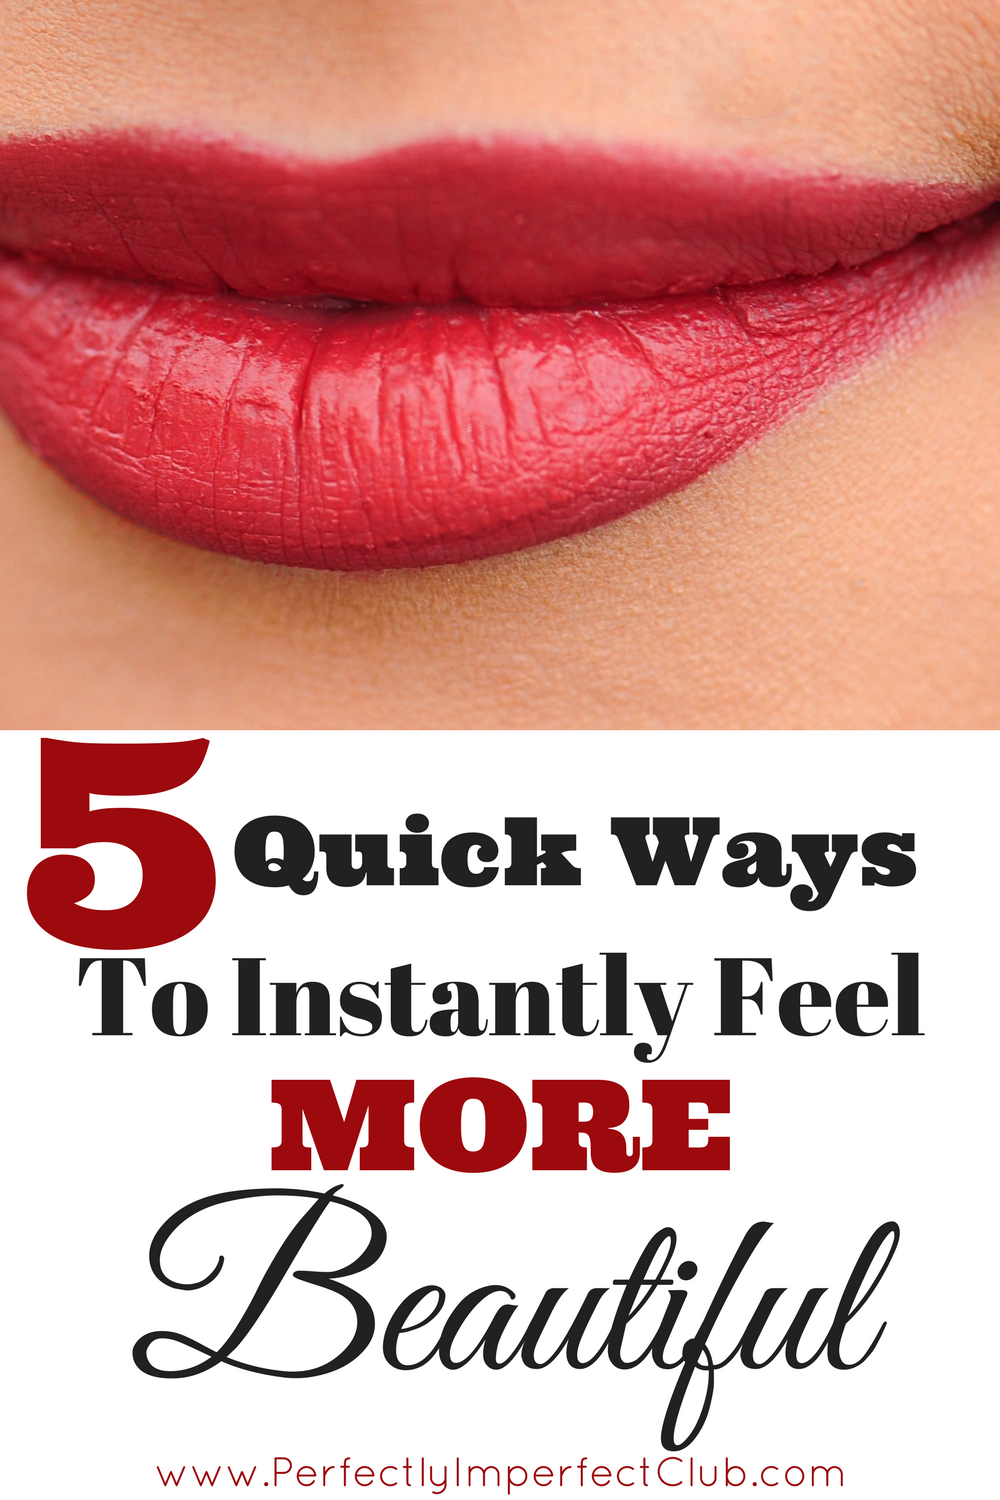 When I need a quick beauty boost in the afternoon, I pick one or two of these tips! I feel more beautiful in no time!